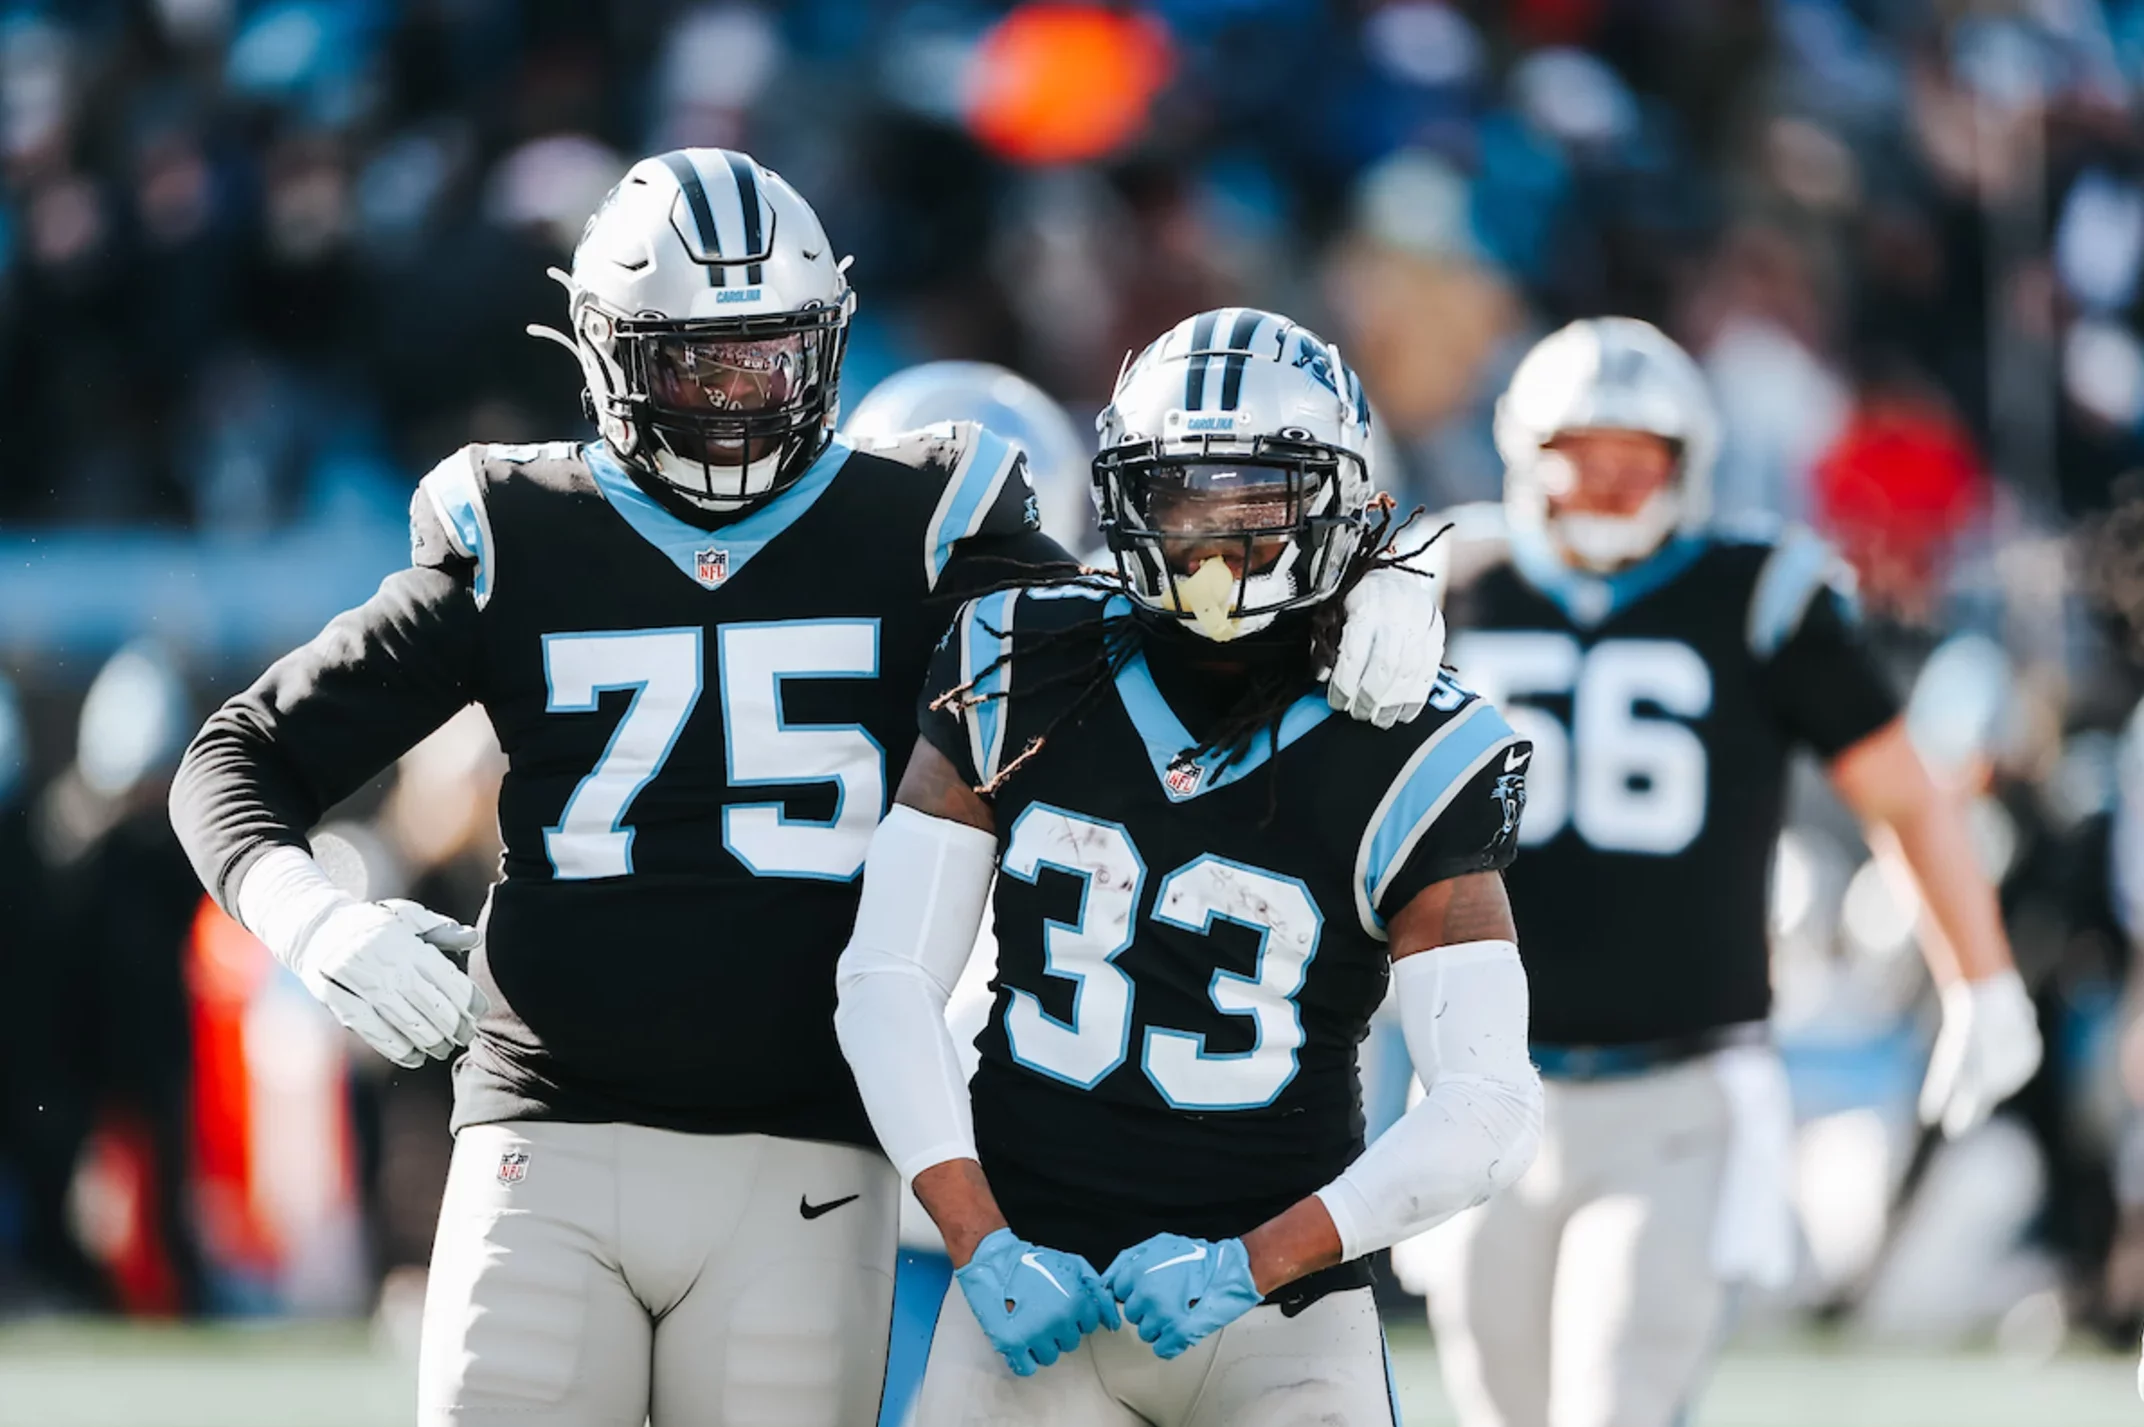 Panthers Respond to Challenge in Win Over Lions